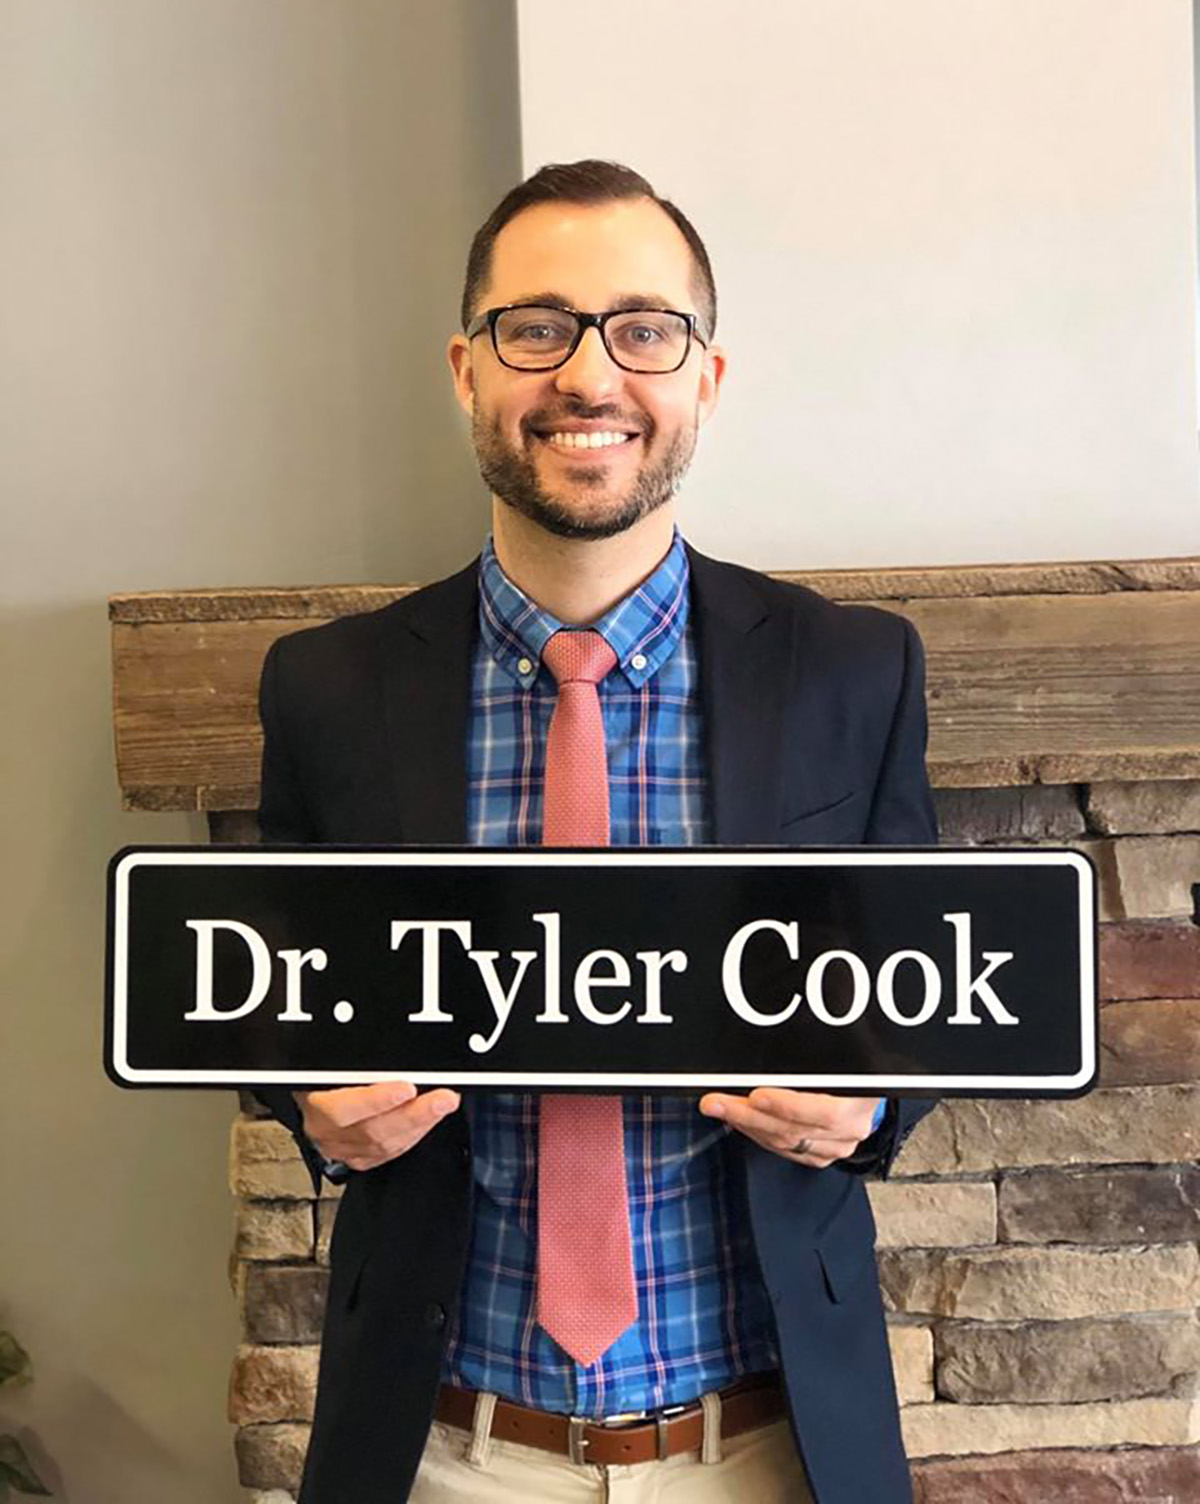 Pictured is Ed.D. grad Dr. Tyler Cook.